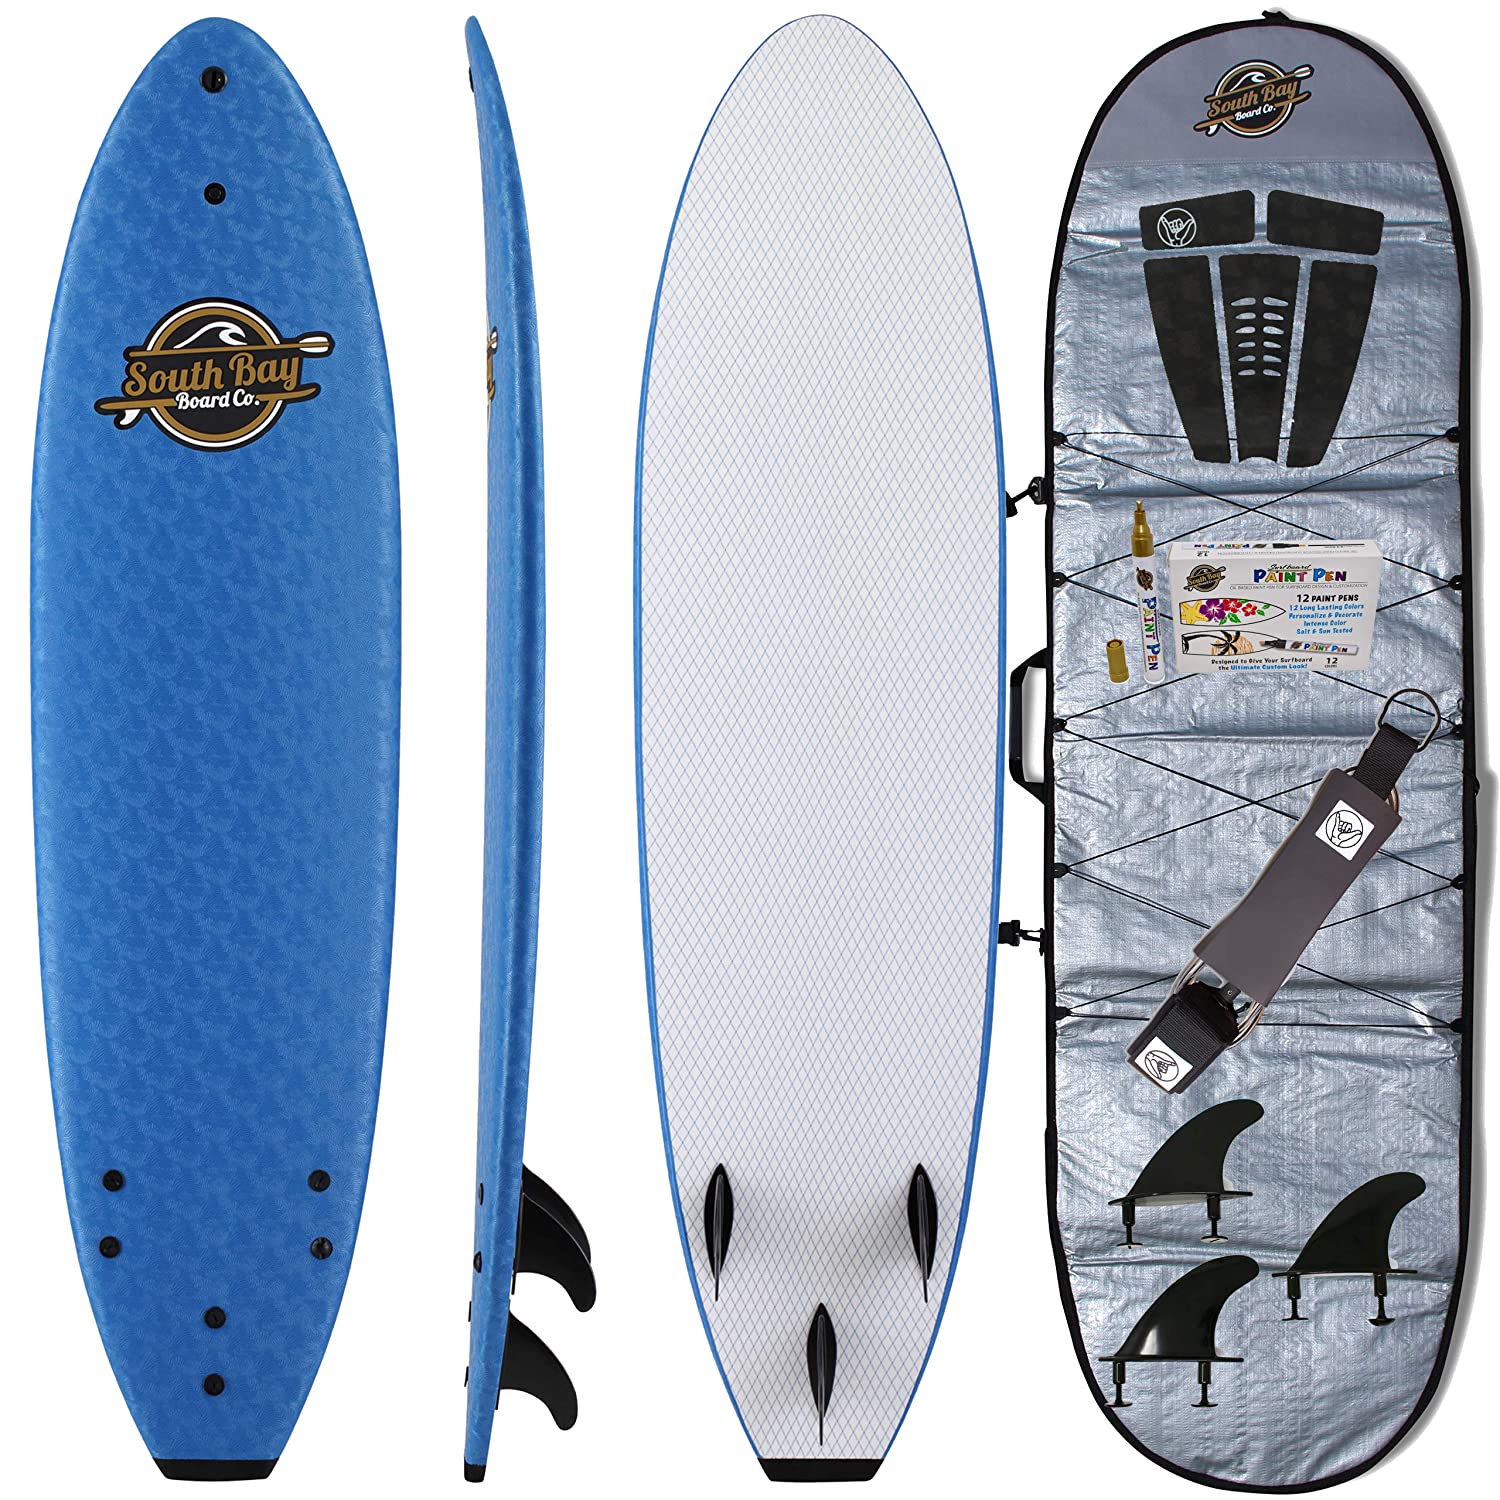 Soft Top Surfboard + Bag Package - Best Foam Surf Board for Beginners, Kids, and Adults